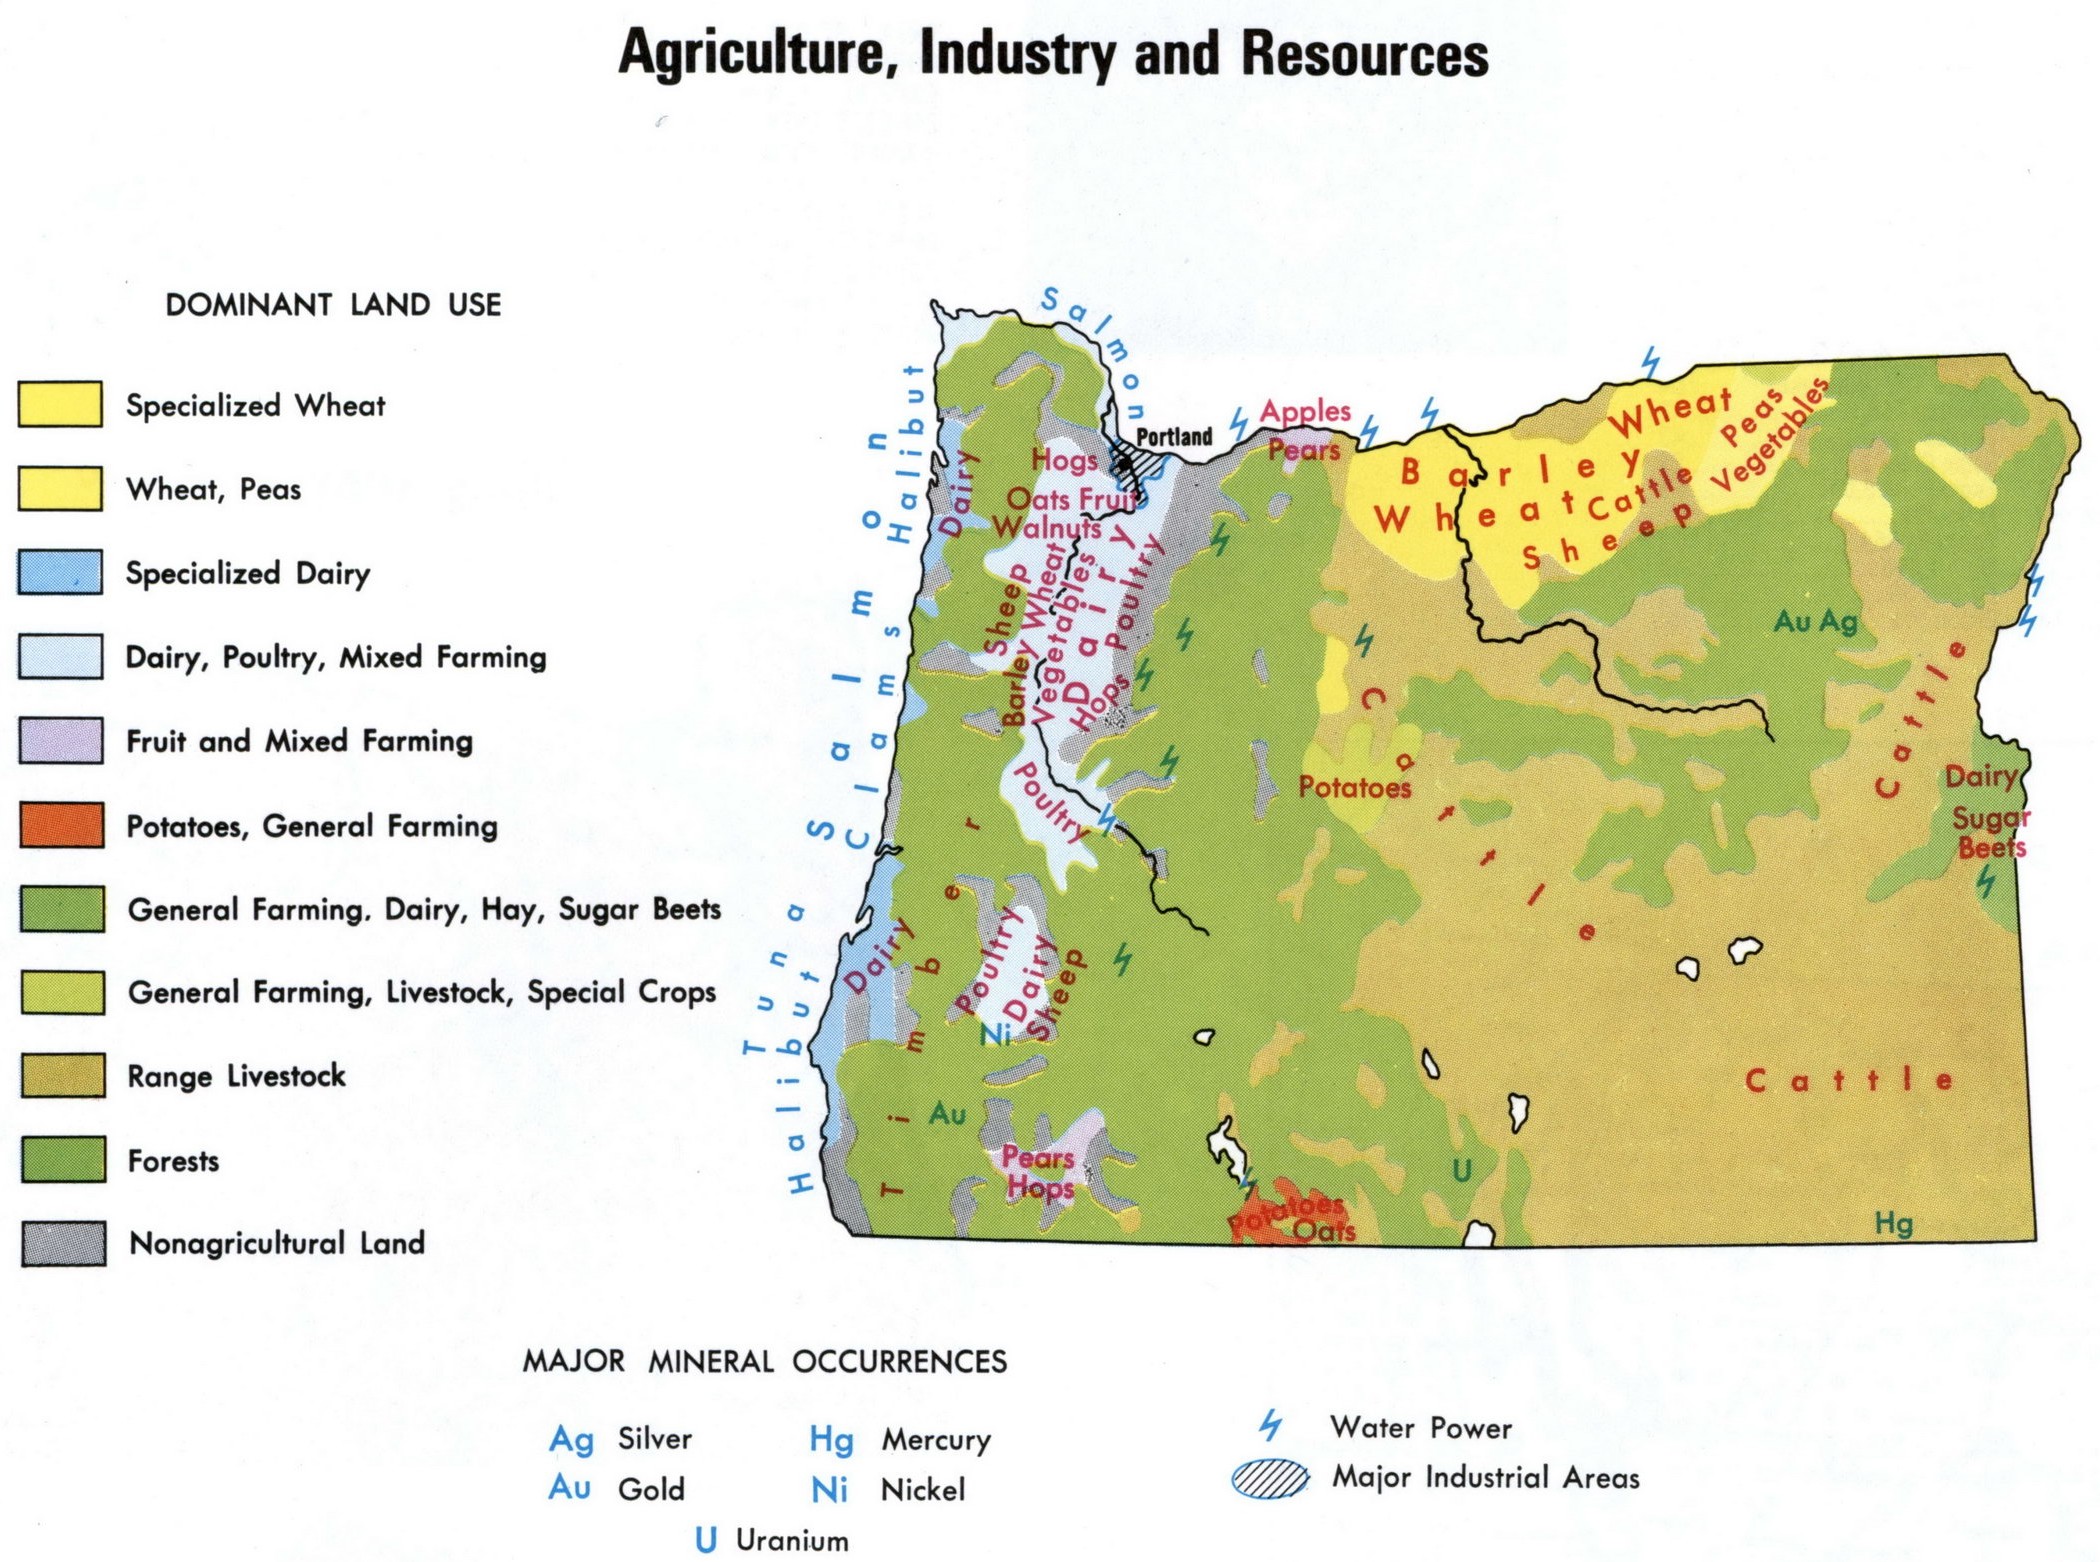 Agriculture, industry and resources map of Oregon